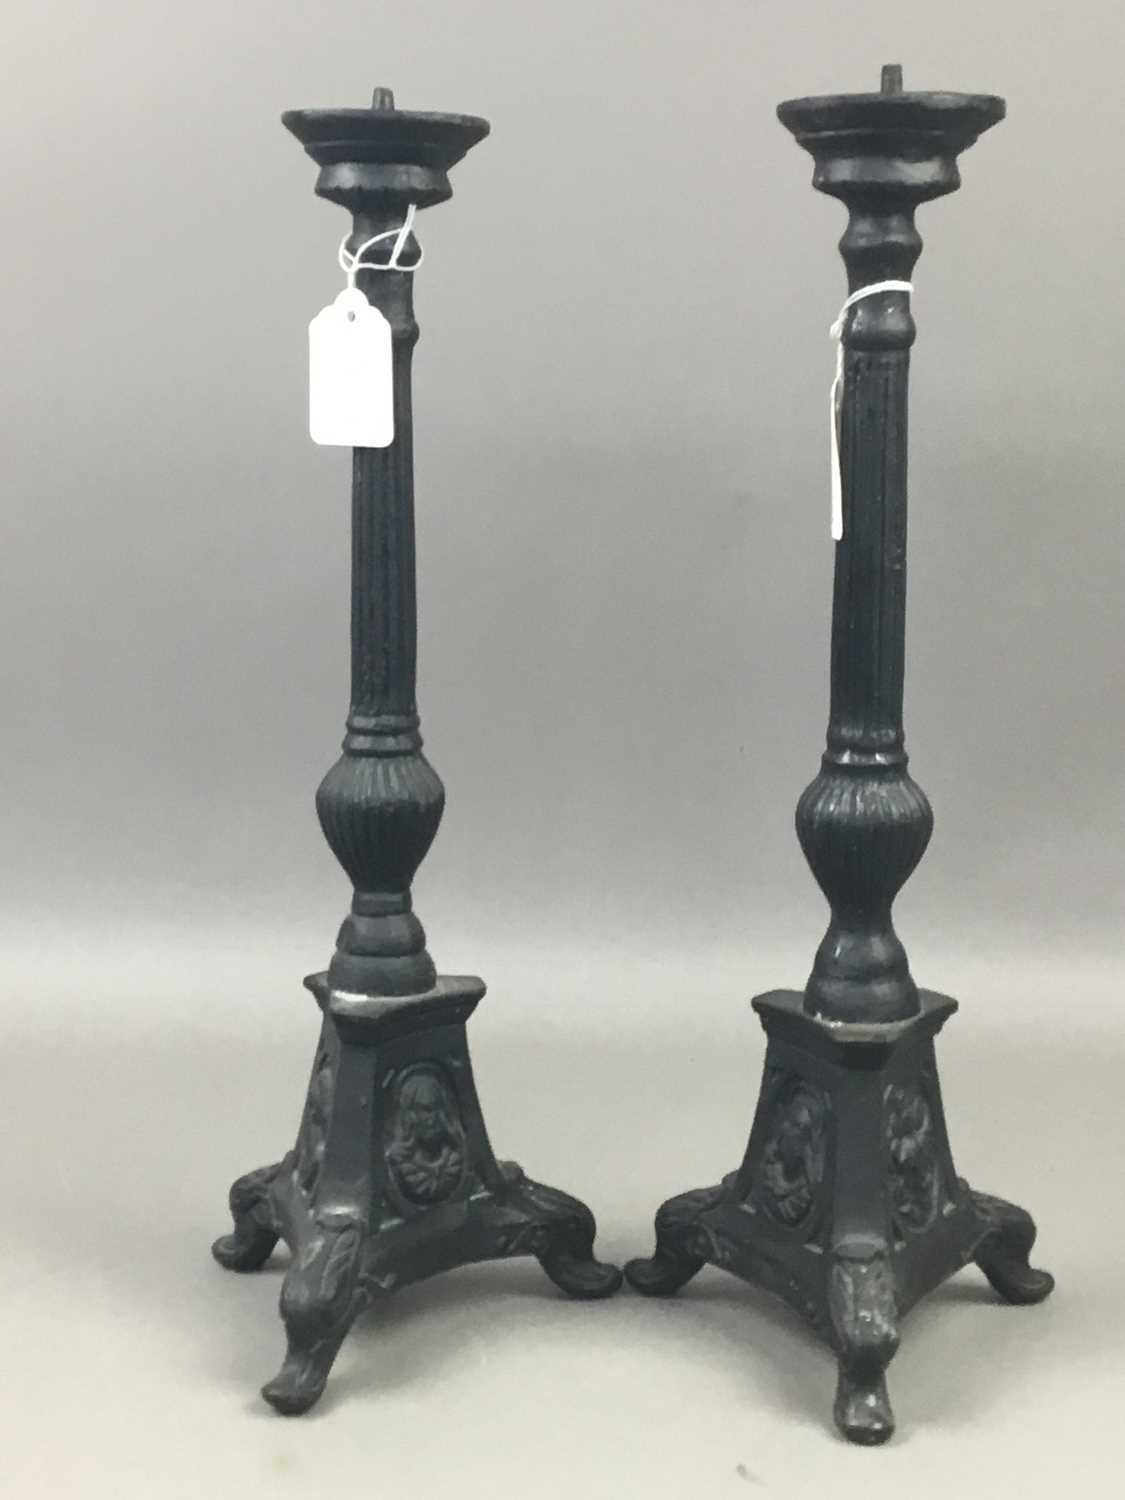 Lot 78 - A PAIR OF CAST IRON CANDLESTICKS AND A FIRE COMPANION